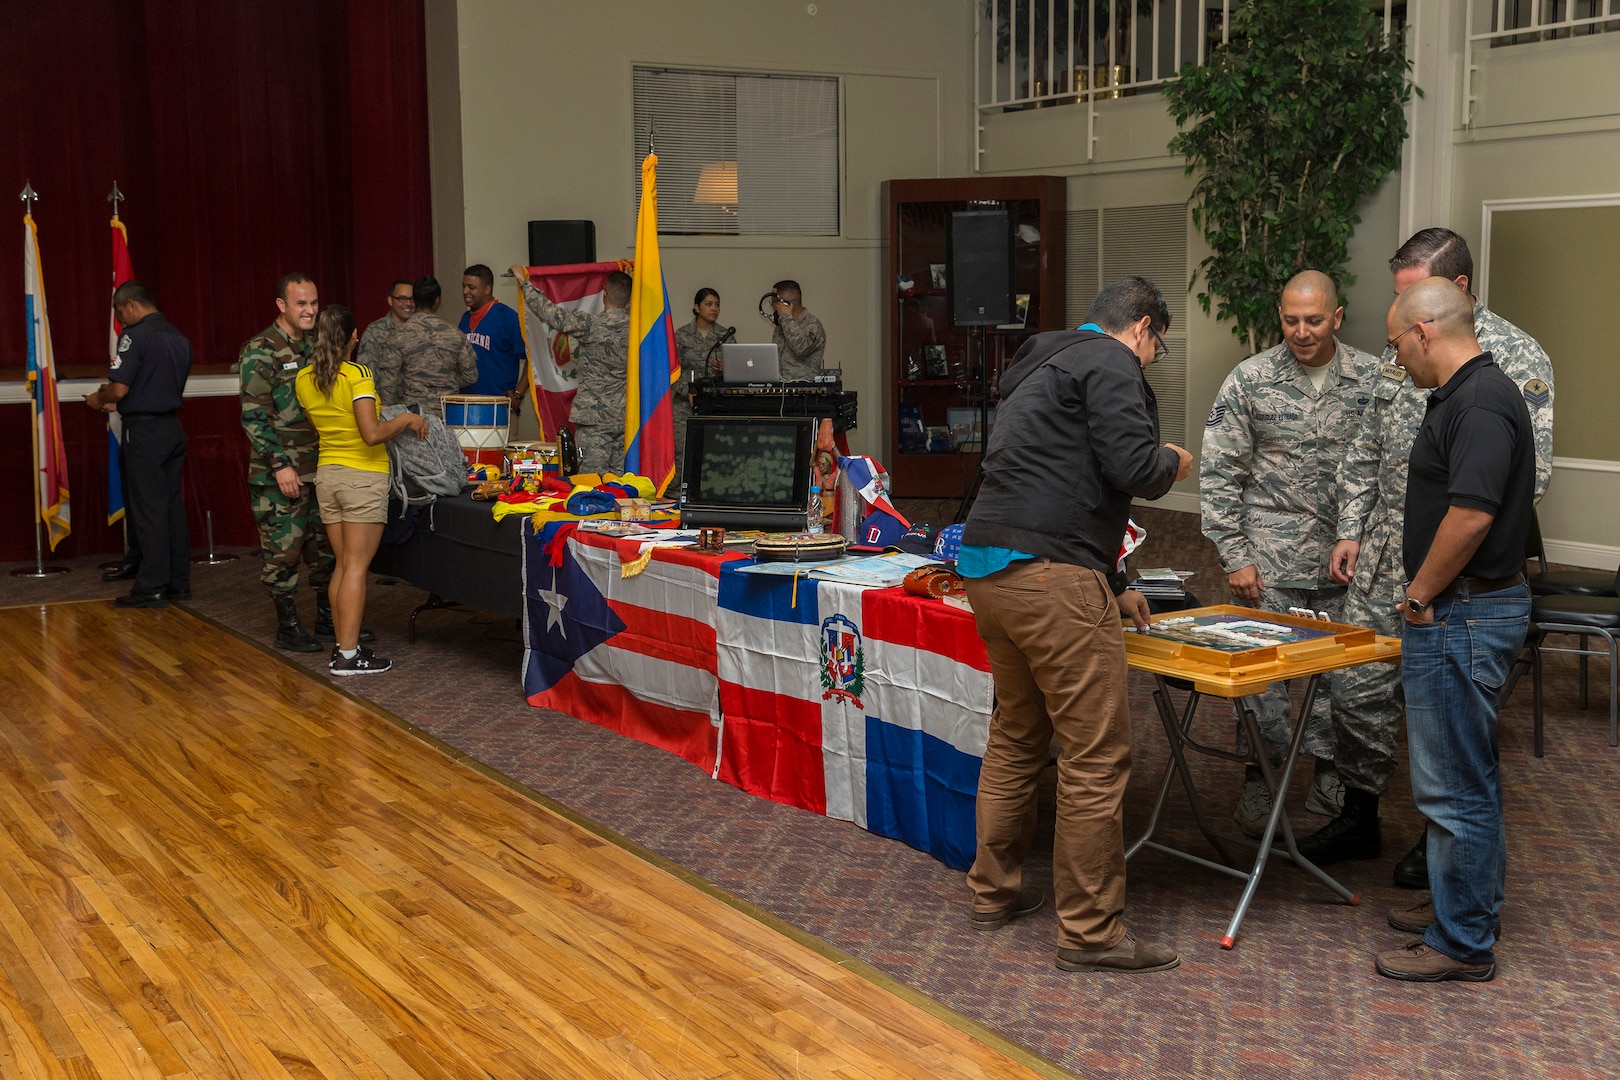 Members of Joint Base San Antonio community take part in a cultural expo at JBSA-Lackland during Hispanic Heritage Month Oct. 11, 2017. The event featured food, music, and traditions from Latin American. (U.S. Air Force by Ismael Ortega.)